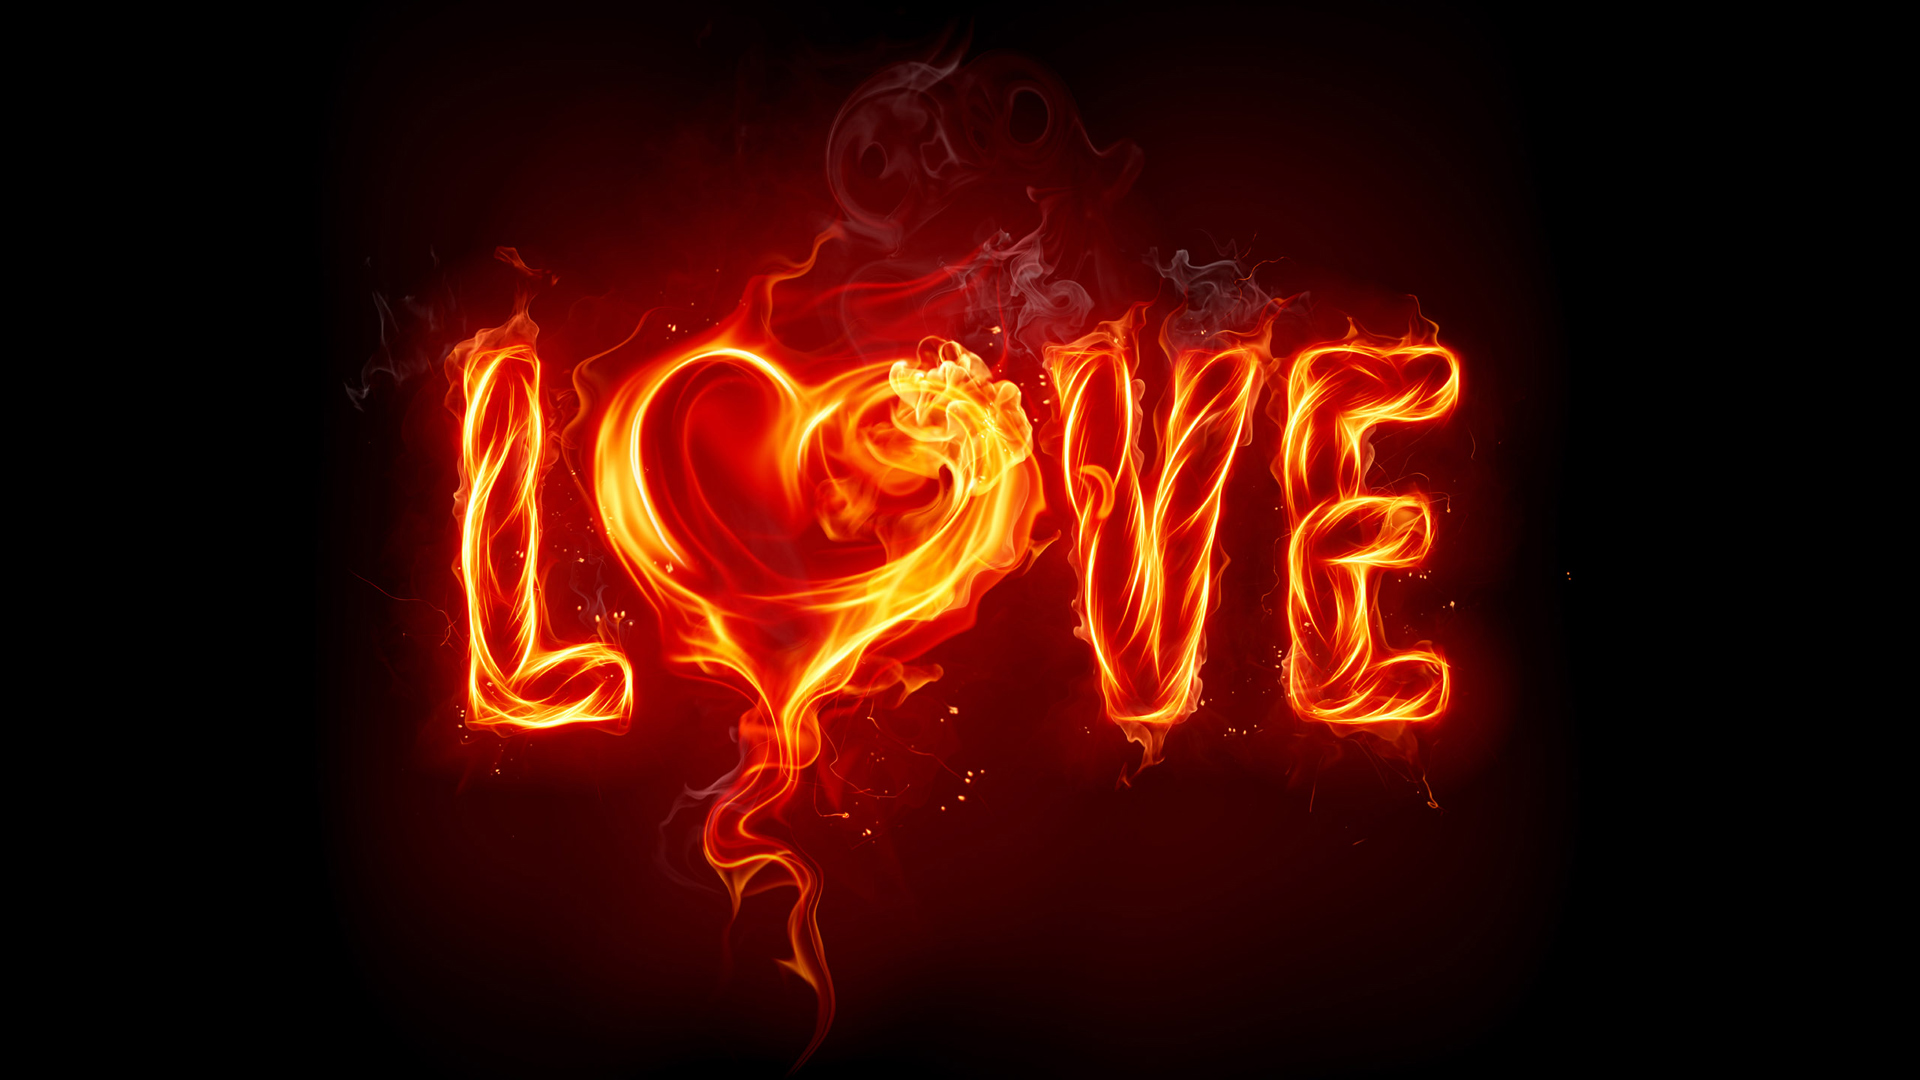 The Fiery Passion of Love